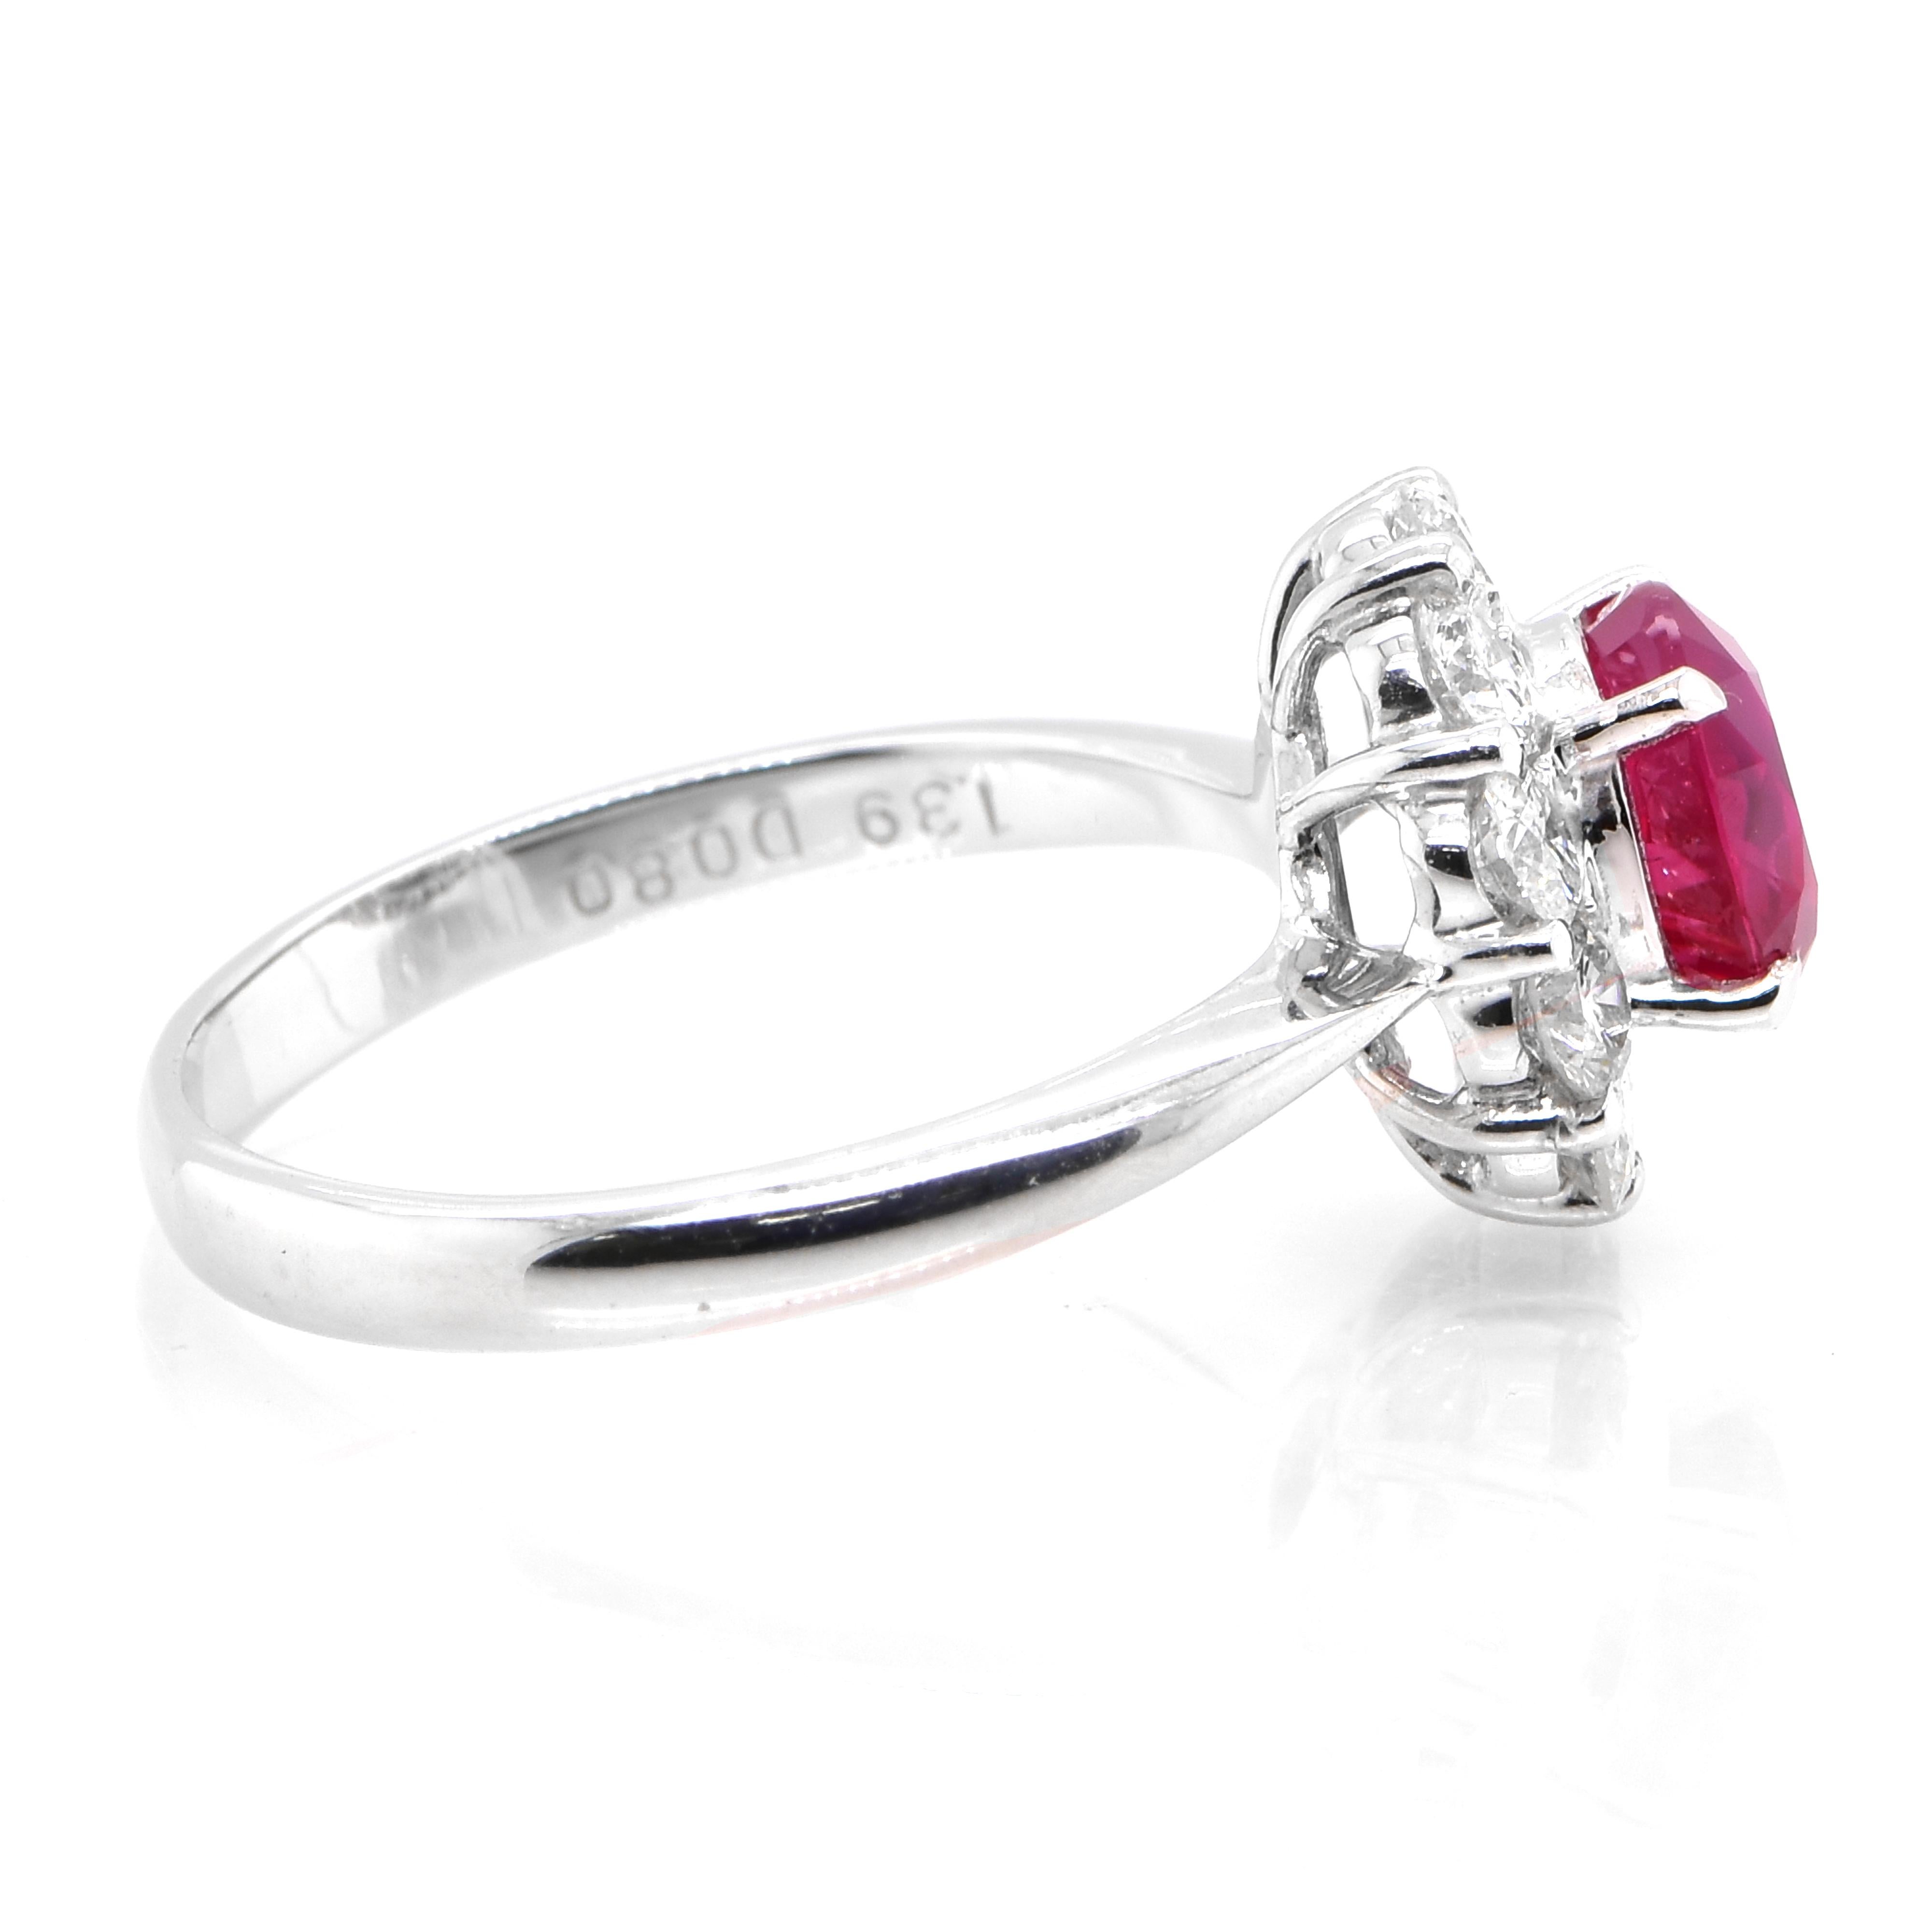 AIGS Certified 1.39 Carat Untreated Ruby and Diamond Ring Made in Platinum In New Condition For Sale In Tokyo, JP